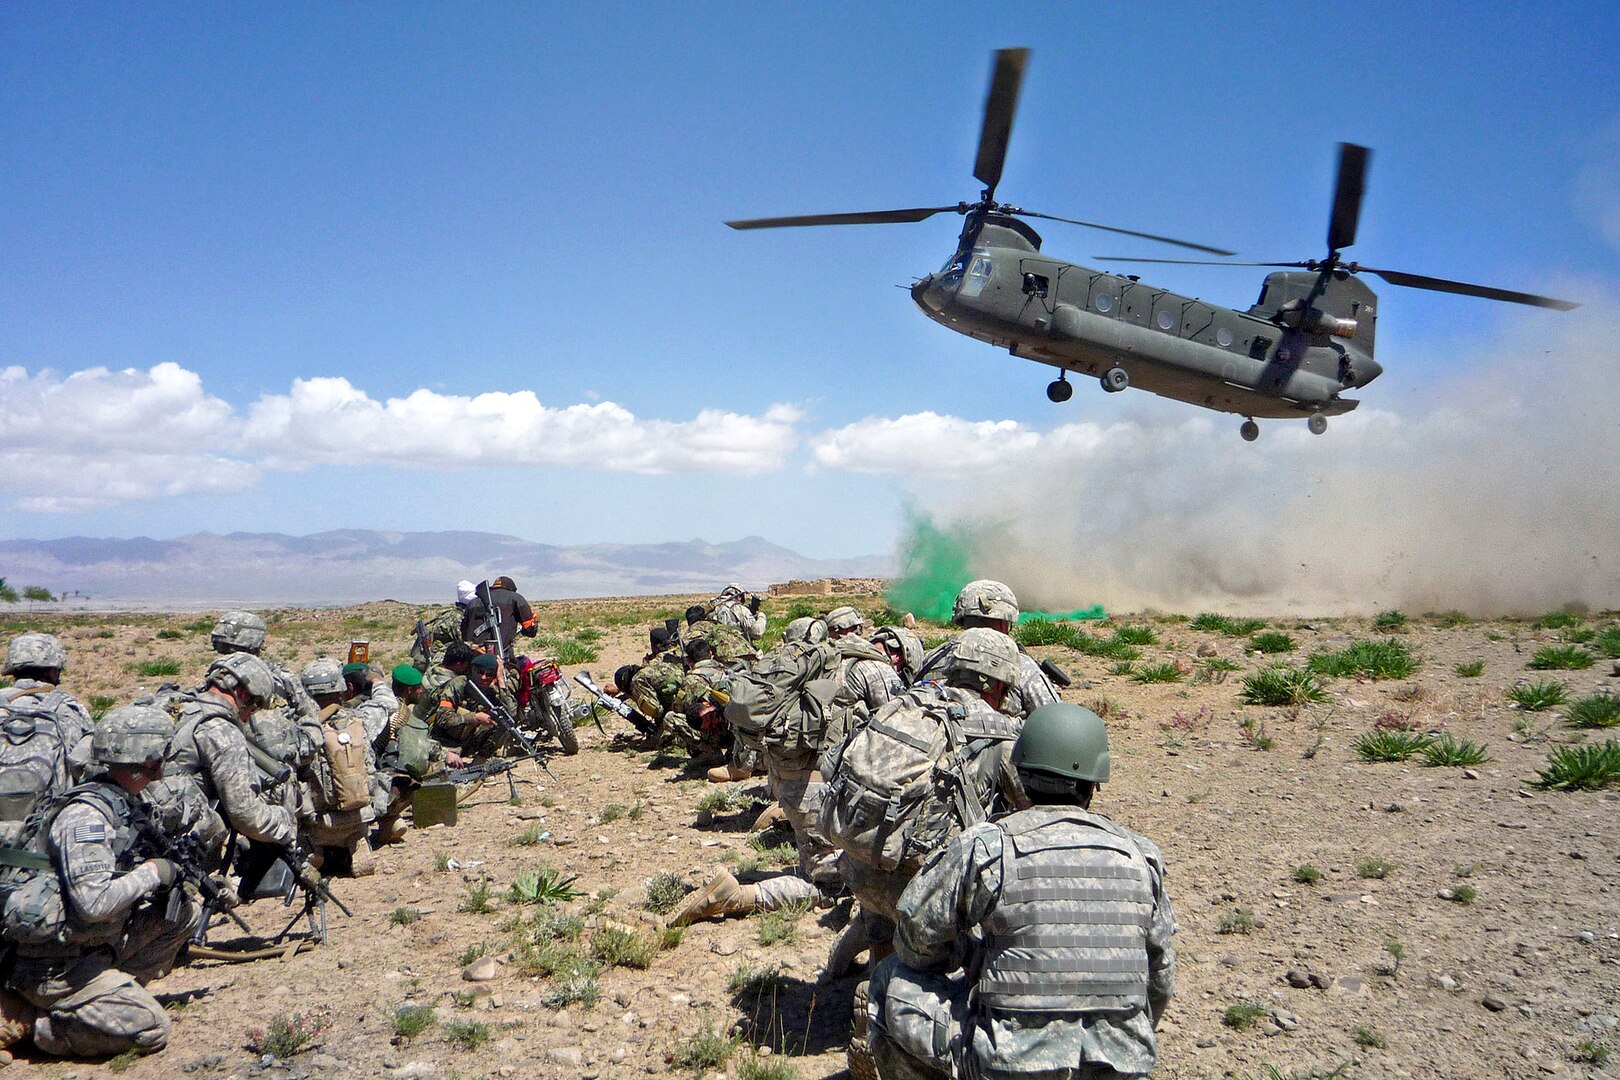 U.S. and Afghan soldiers watch as the CH-47 Chinook helicopter that brought them to the village of Mengal Kheyl in the Zormat district of Afghanistan's Paktya province, lands after completing an air assault mission, April 22, 2010. The soldiers, who captured the district's largest weapons cache in three years are assigned to Company C, 3rd Battalion, 172nd Infantry Regiment, Vermont National Guard.